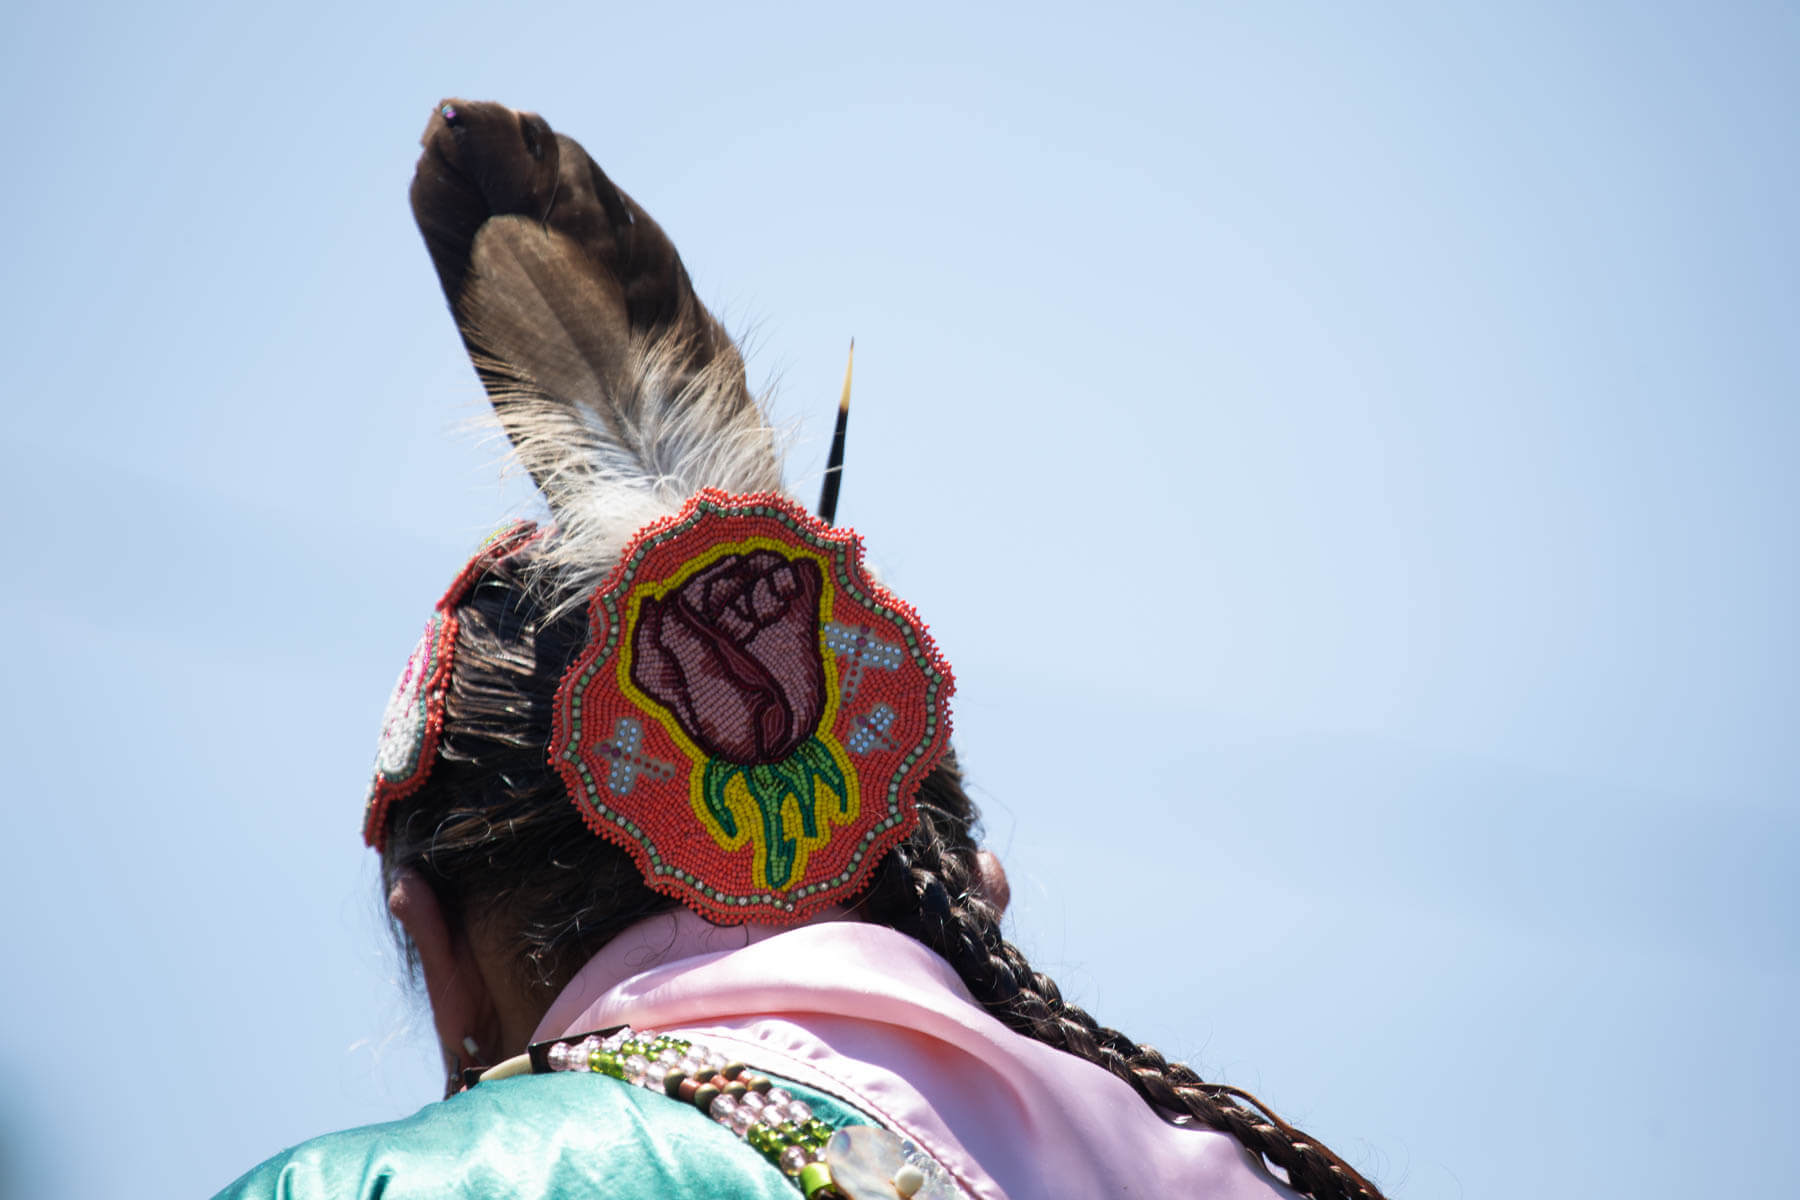 The back of a woman's head is shown with a beaded headpiece and feather